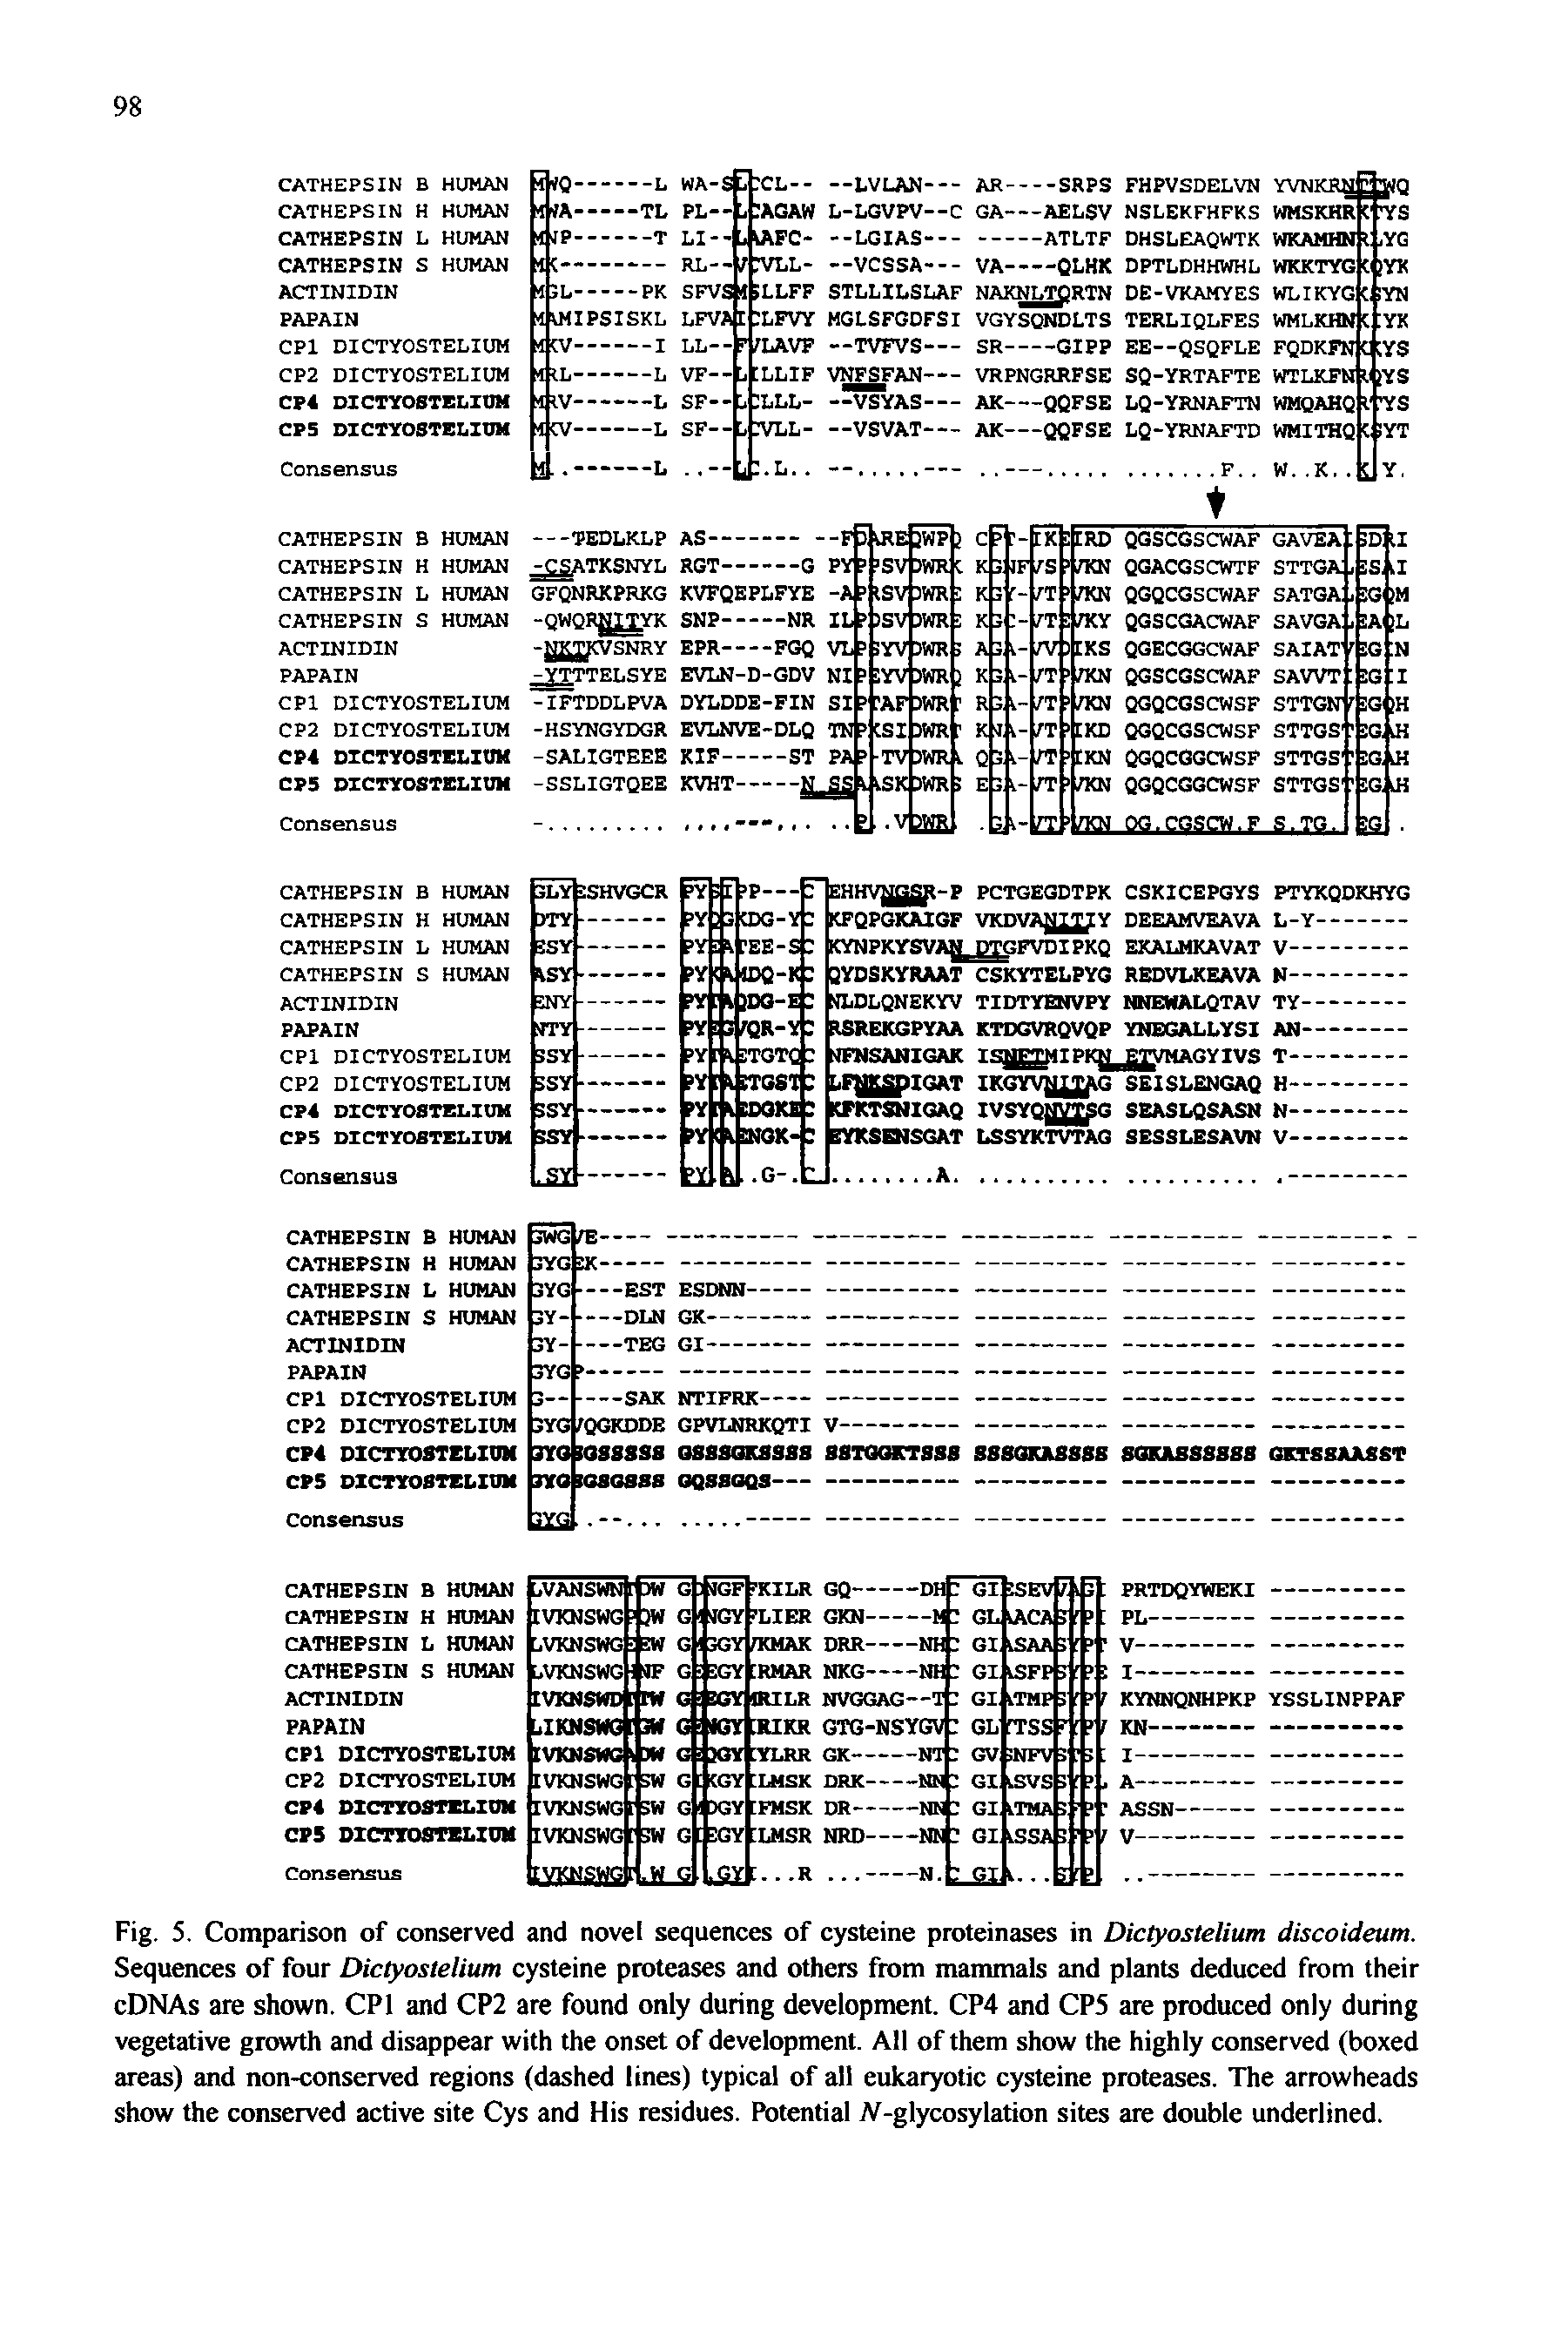 Fig. 5. Comparison of conserved and novel sequences of cysteine proteinases in Dictyostelium discoideum. Sequences of four Dictyostelium cysteine proteases and others from mammals and plants deduced from their cDNAs are shown. CPI and CP2 are found only during development. CP4 and CP5 are produced only during vegetative growth and disappear with the onset of development. All of them show the highly conserved (boxed areas) and non-conserved regions (dashed lines) typical of all eukaryotic cysteine proteases. The arrowheads show the conserved active site Cys and His residues. Potential A-glycosylation sites are double underlined.